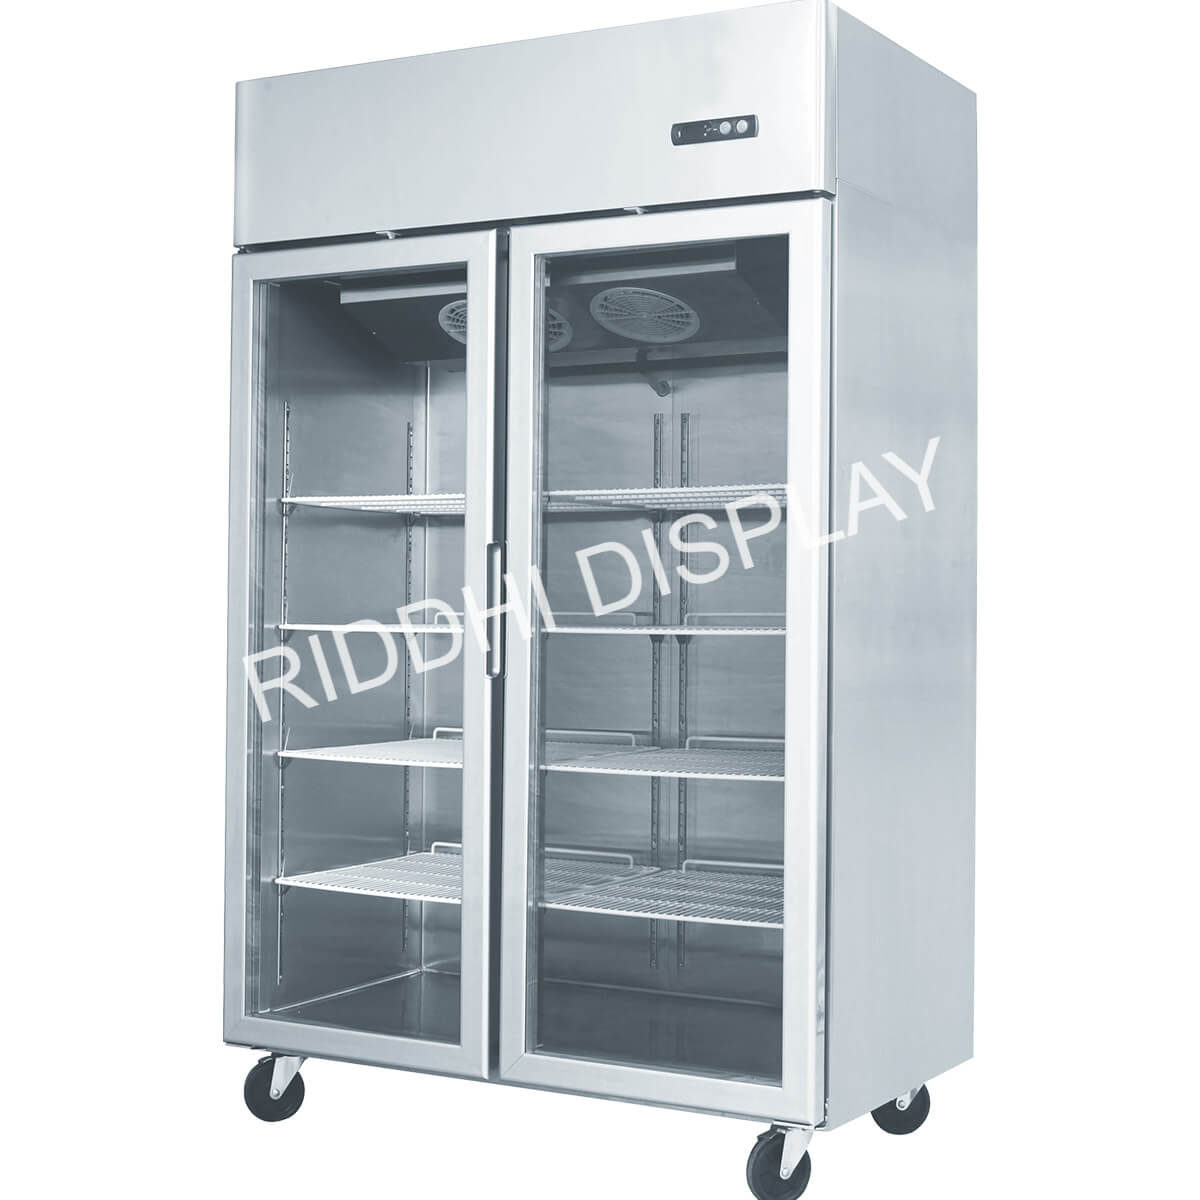 Types of Commercial Refrigerators